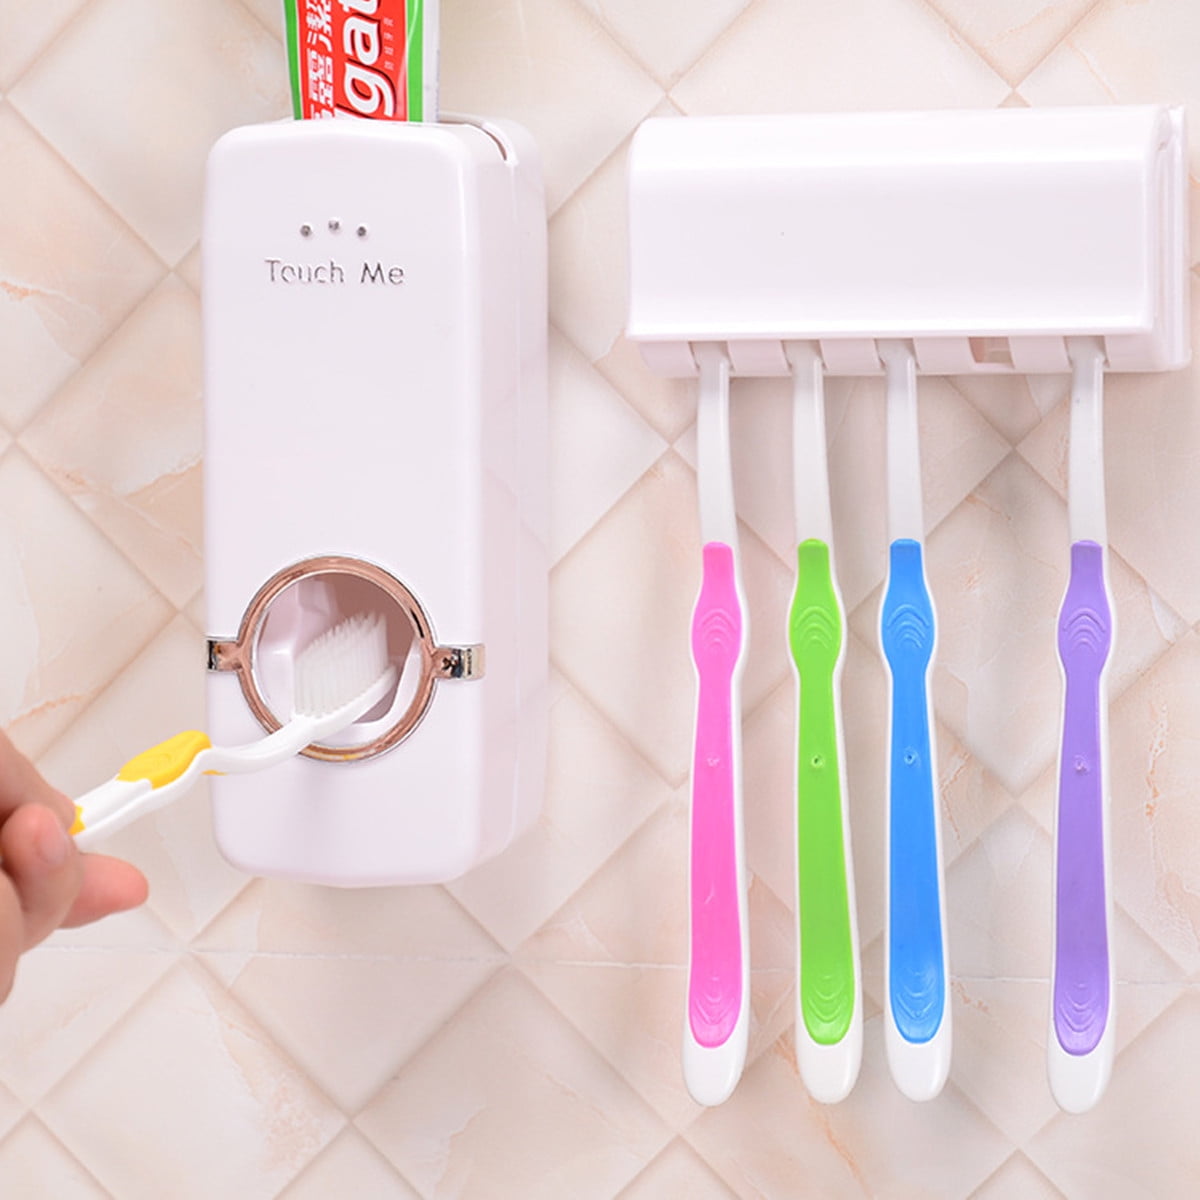 Touch Me ONE-TOUCH Automatic Toothpaste Dispenser with 5 Toothbrush Holder 